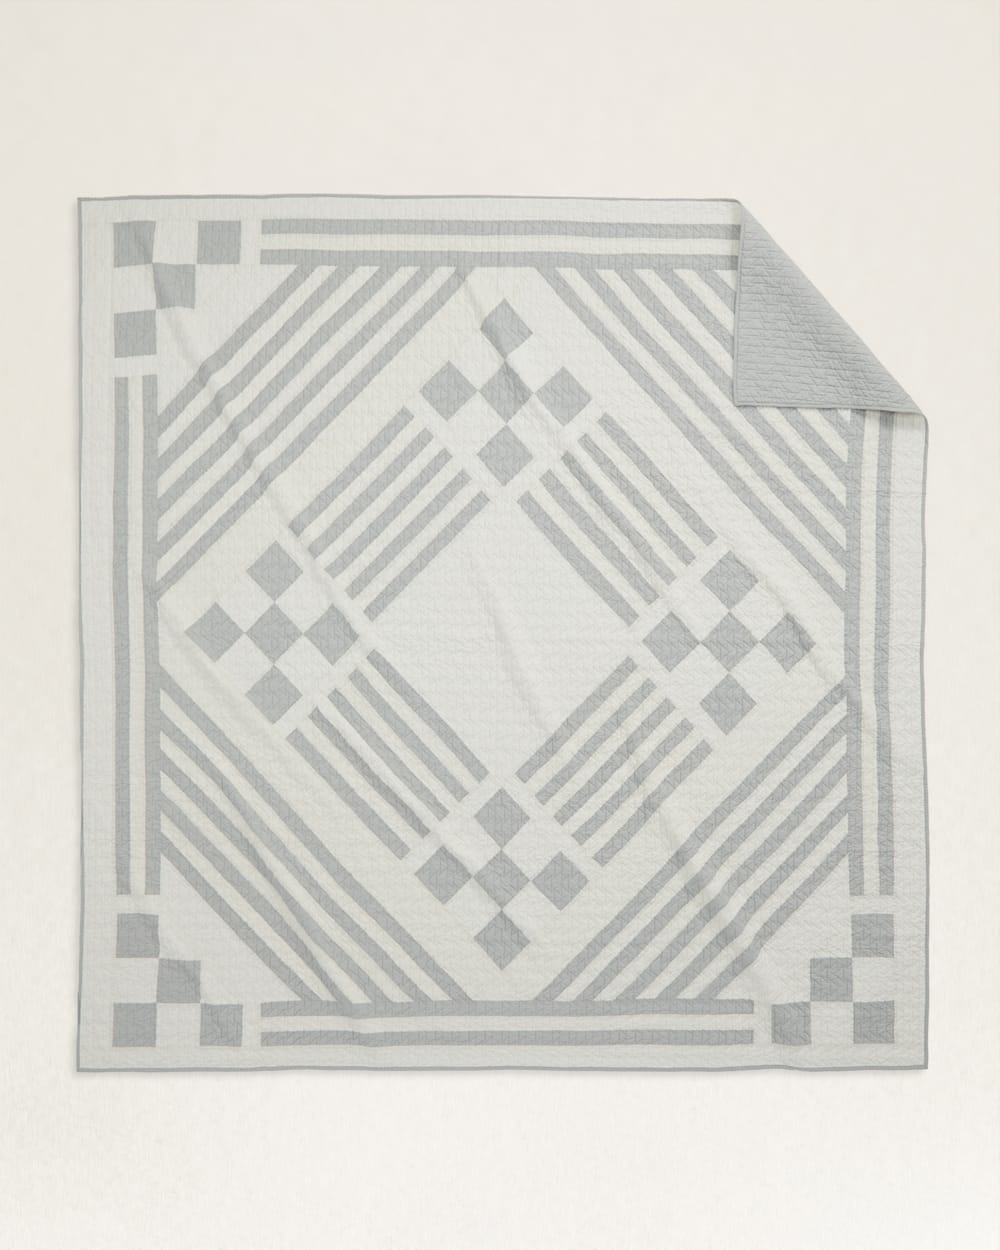 ALTERNATE VIEW OF WILLOW CREEK PIECED QUILT SET IN IVORY image number 4